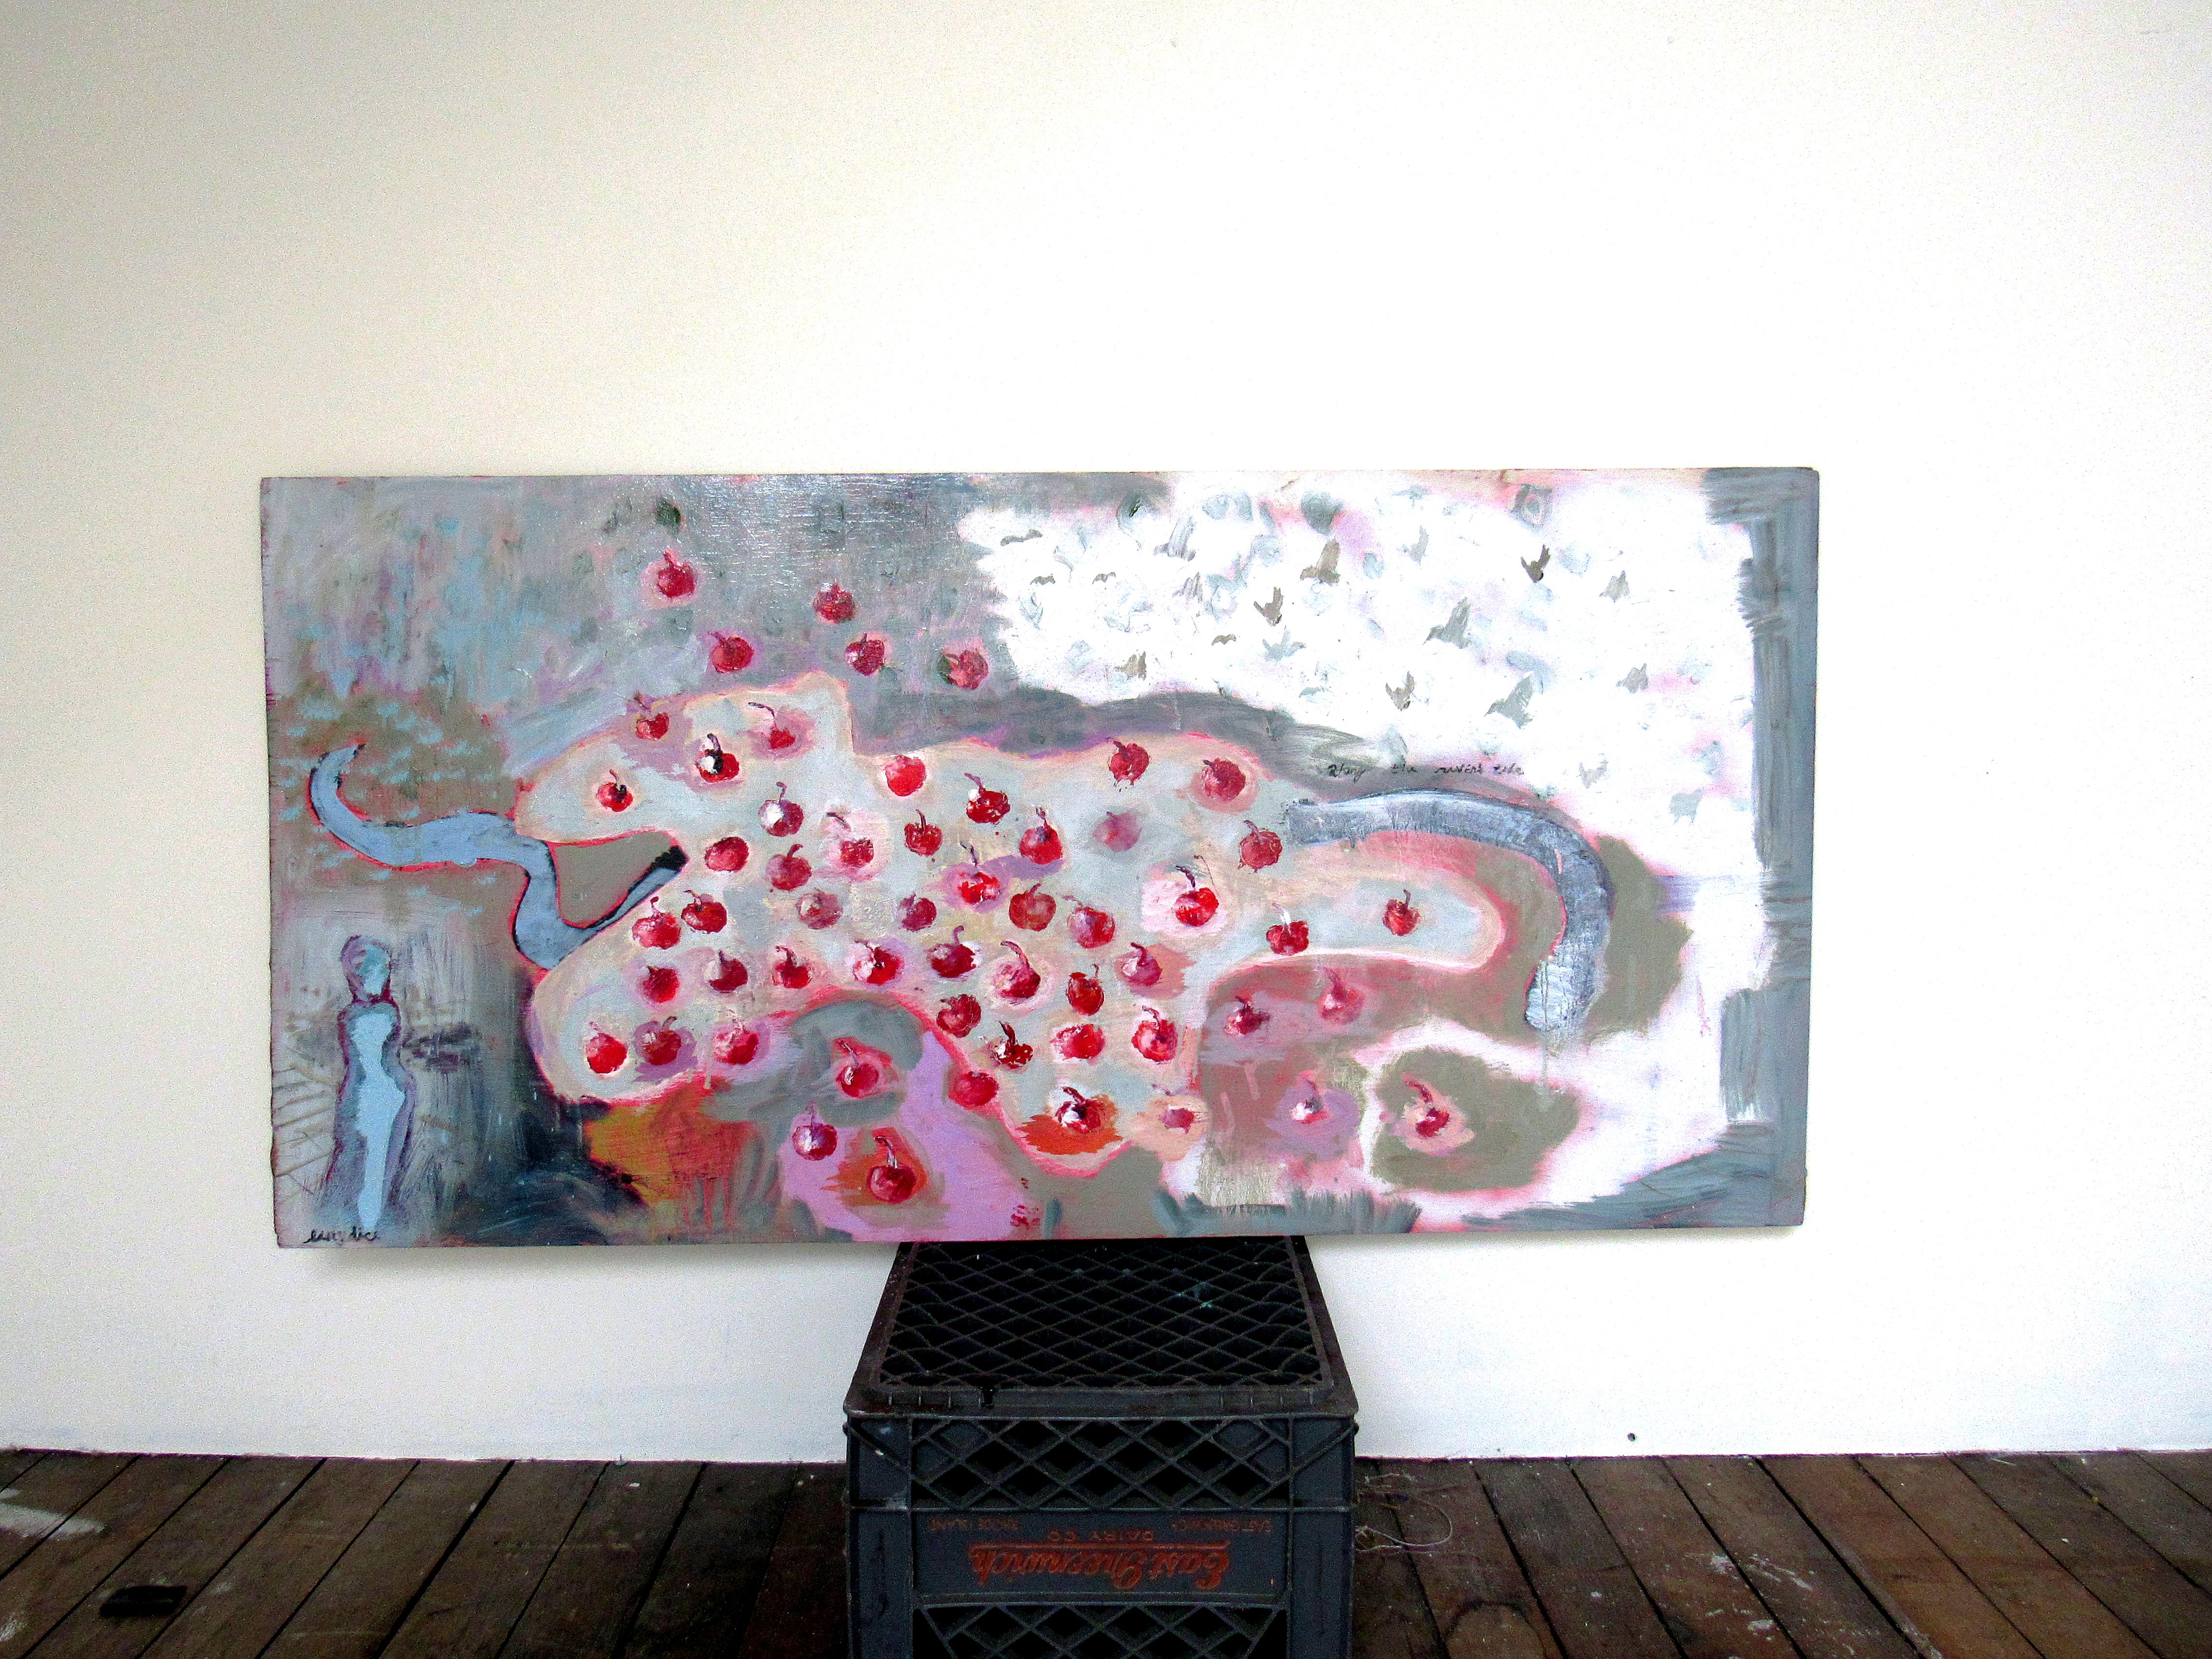 Eurydice Along the River's Tide, abstract w birds red cherries, water blues - Painting by C. Dimitri